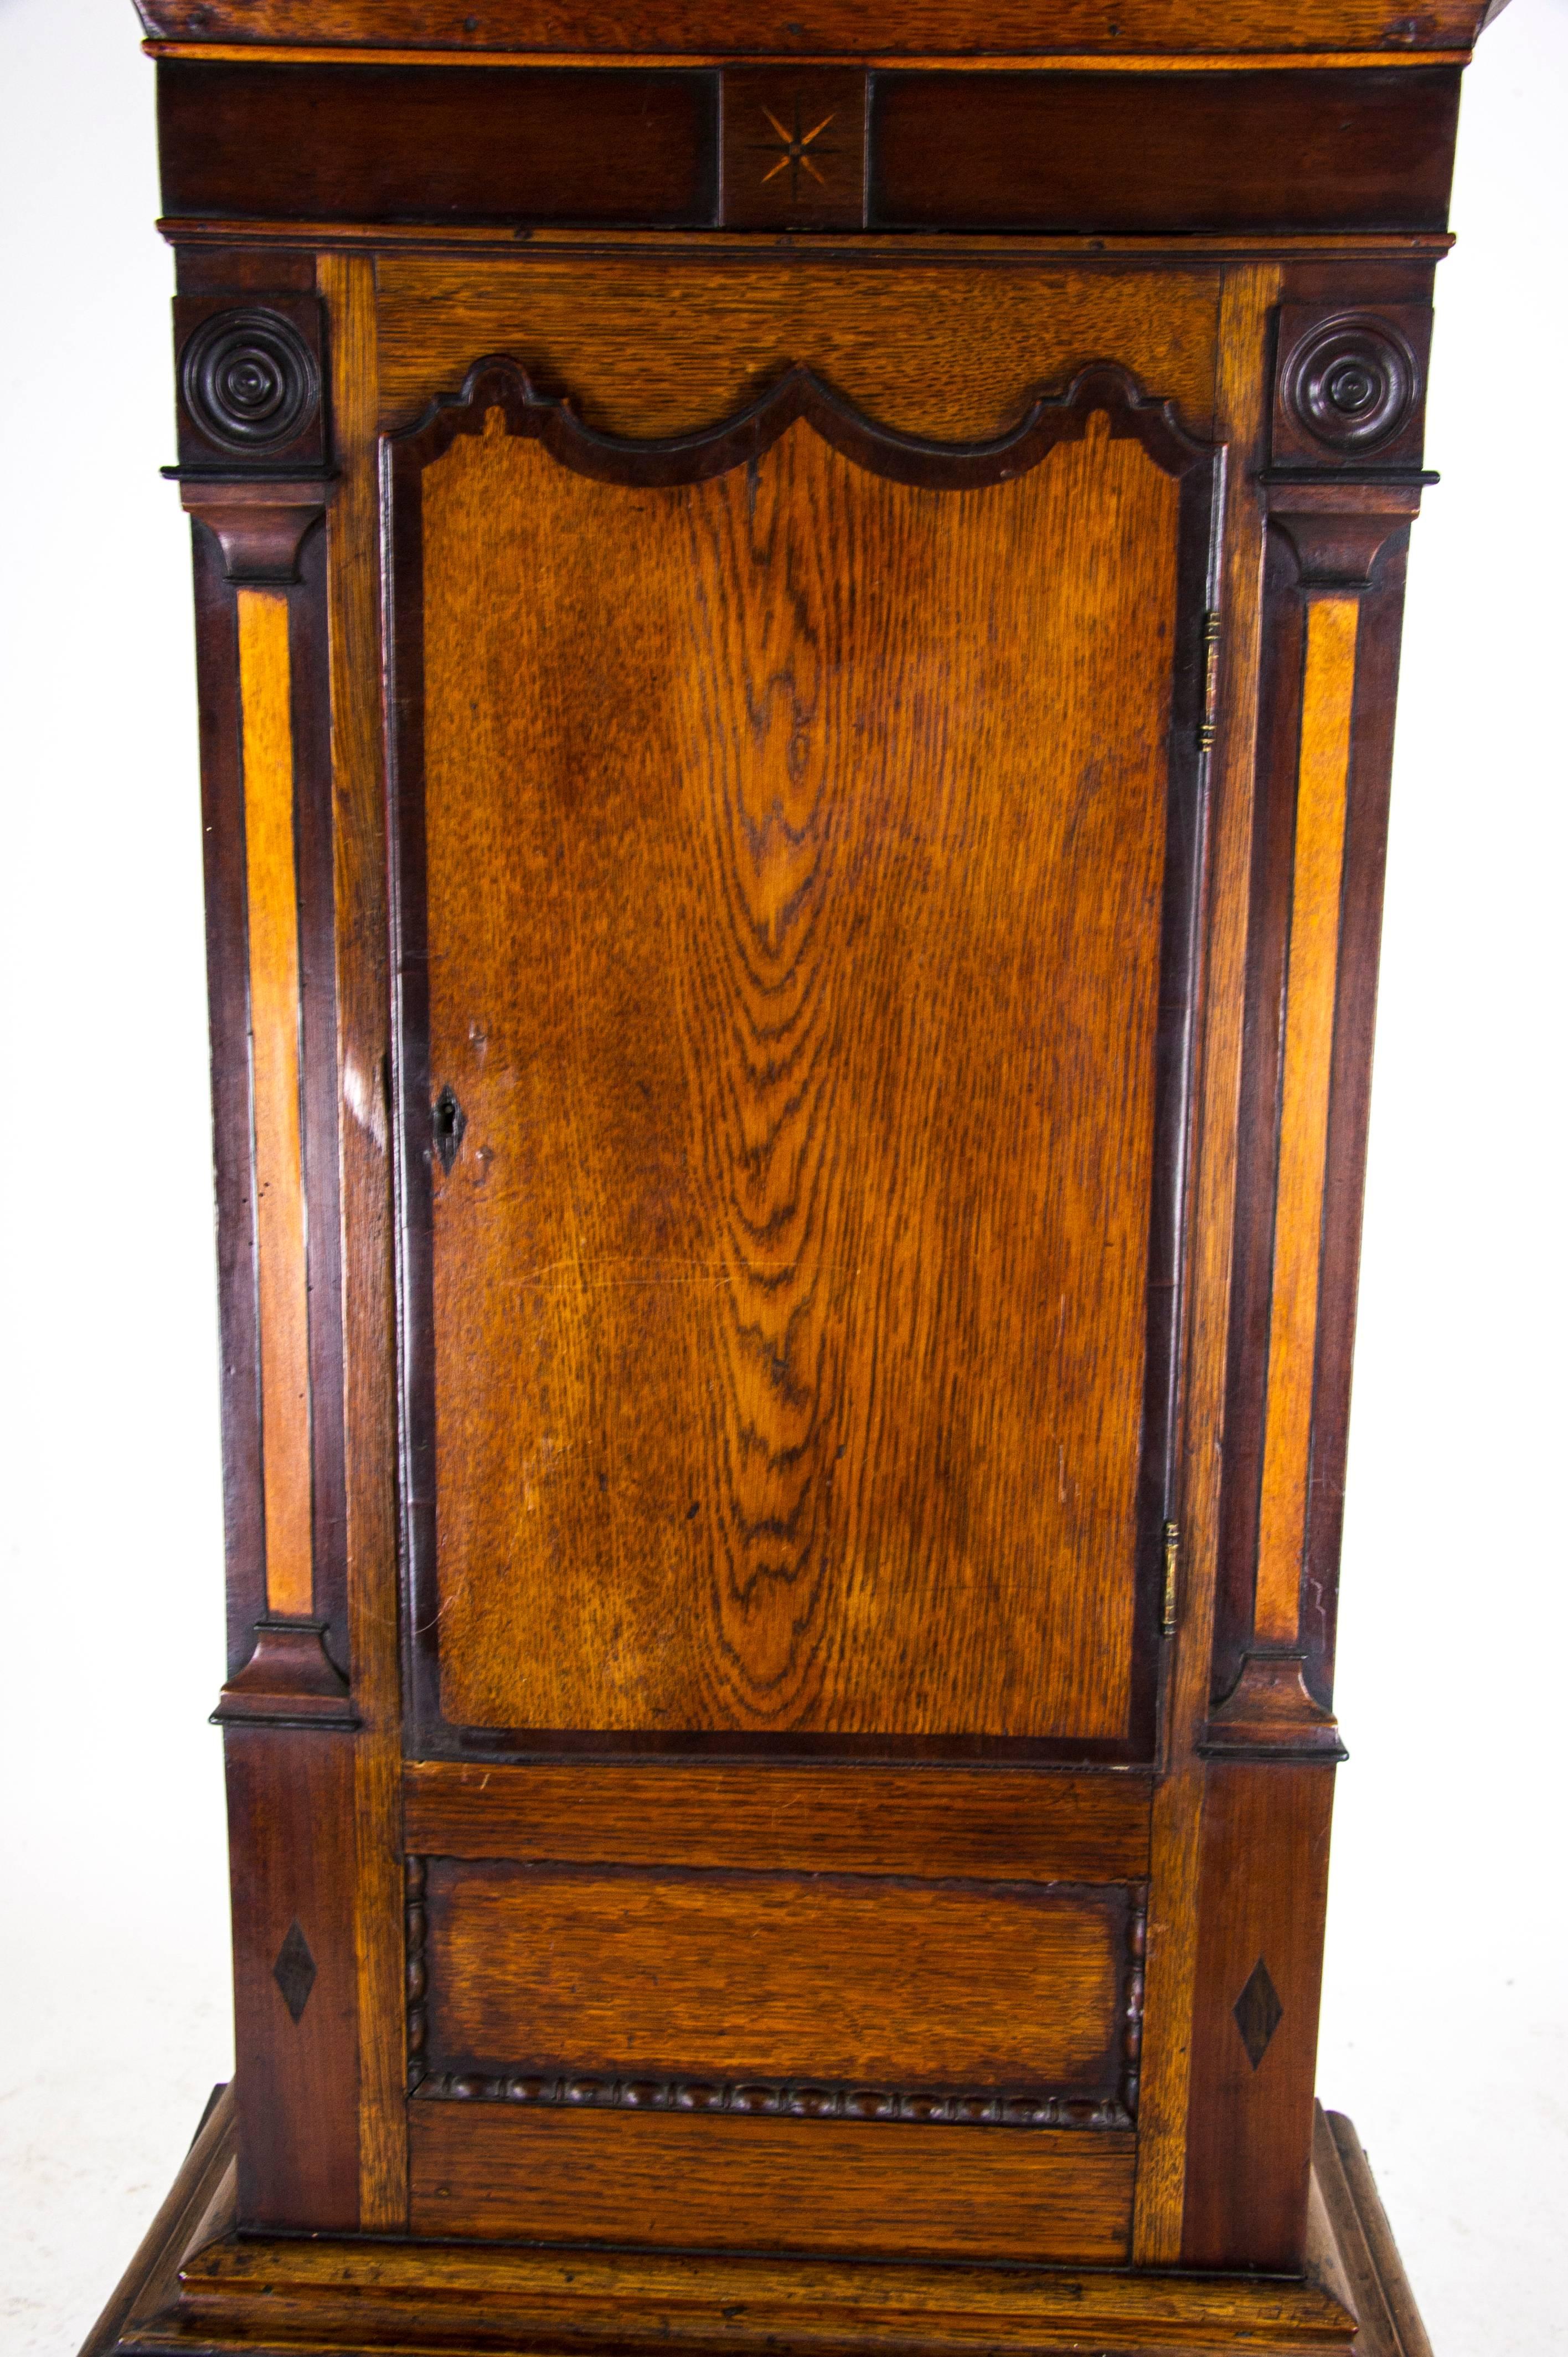 Early 19th Century Antique Long Case Clock, Grandfather Clock, John Parry Tremadoc, 1820  REDUCED!!